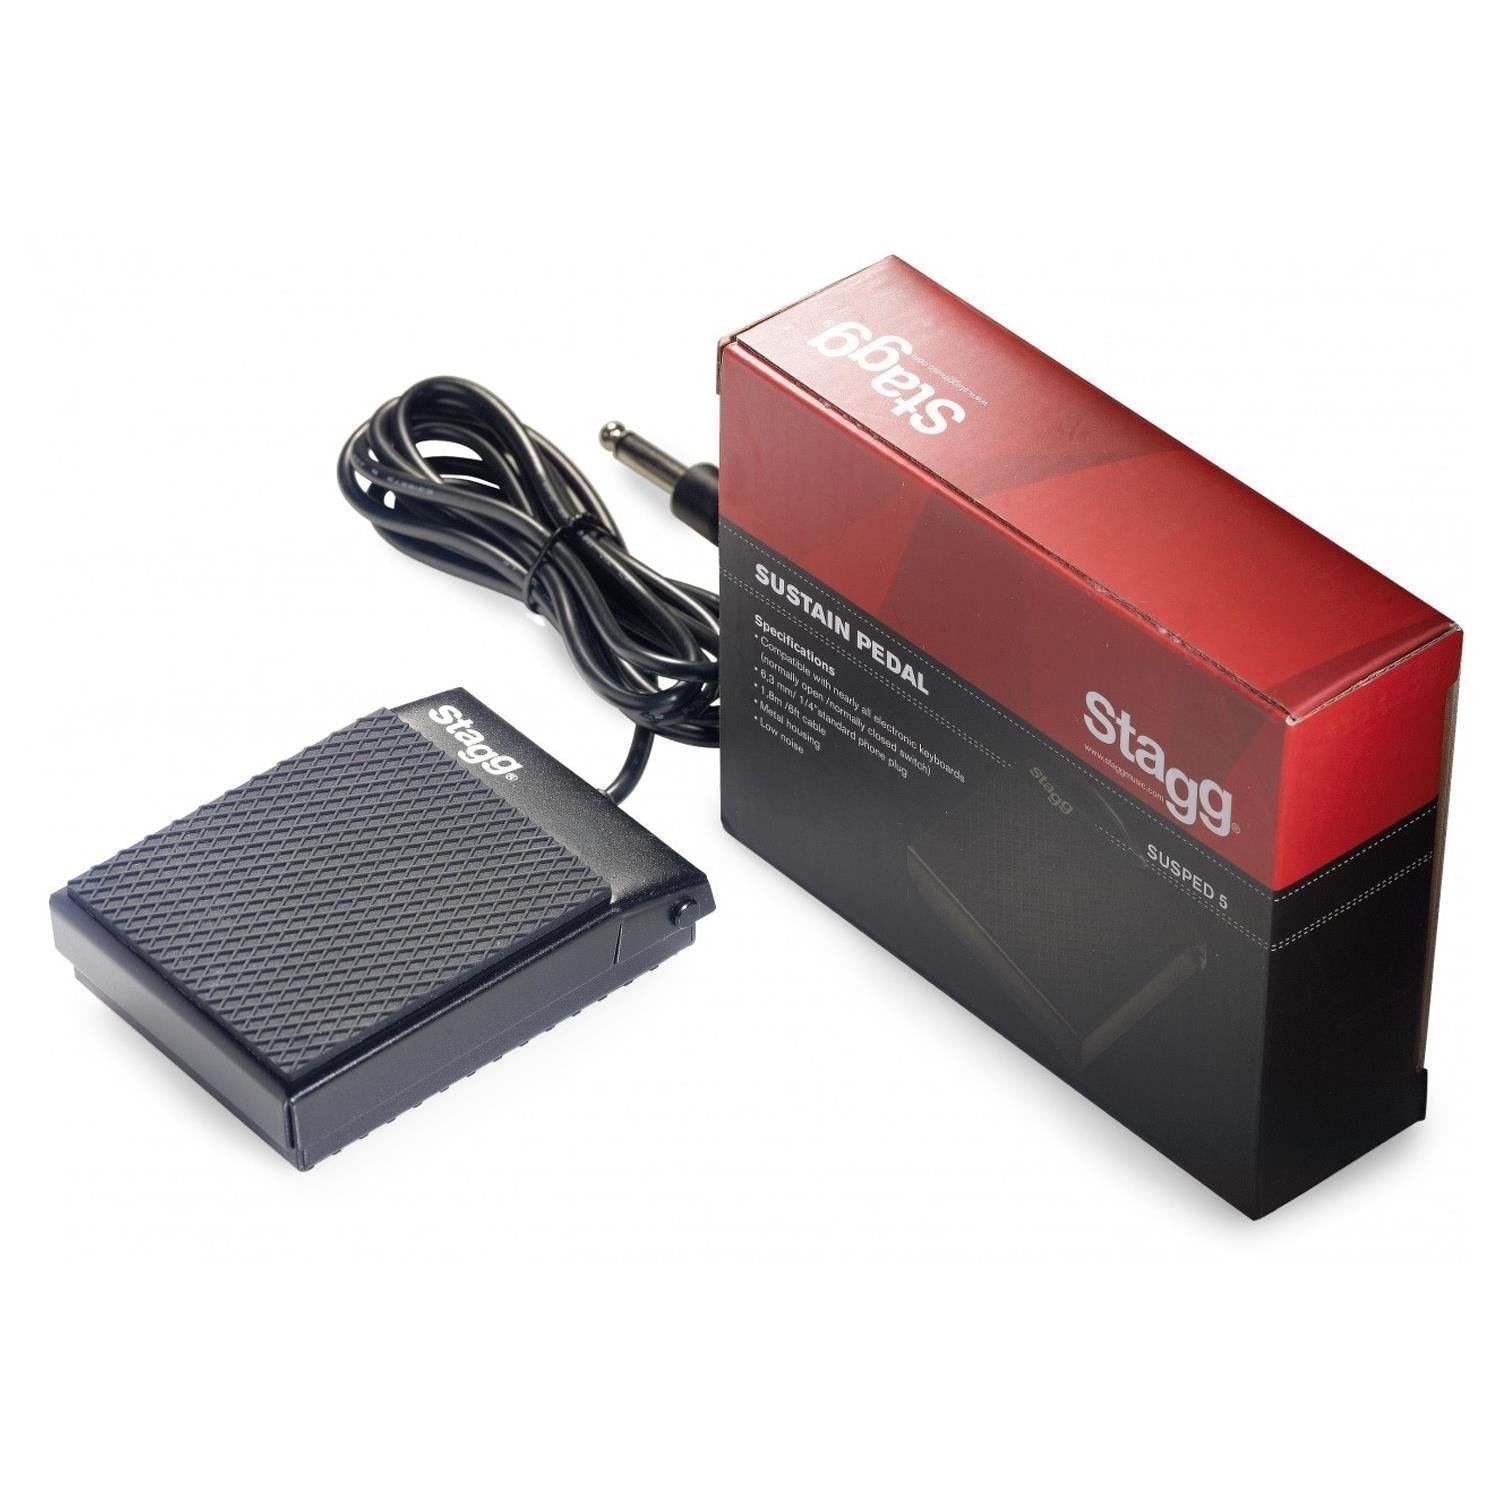 Stagg Susped 5 Keyboard and Digital Piano Sustain Pedal - DY Pro Audio